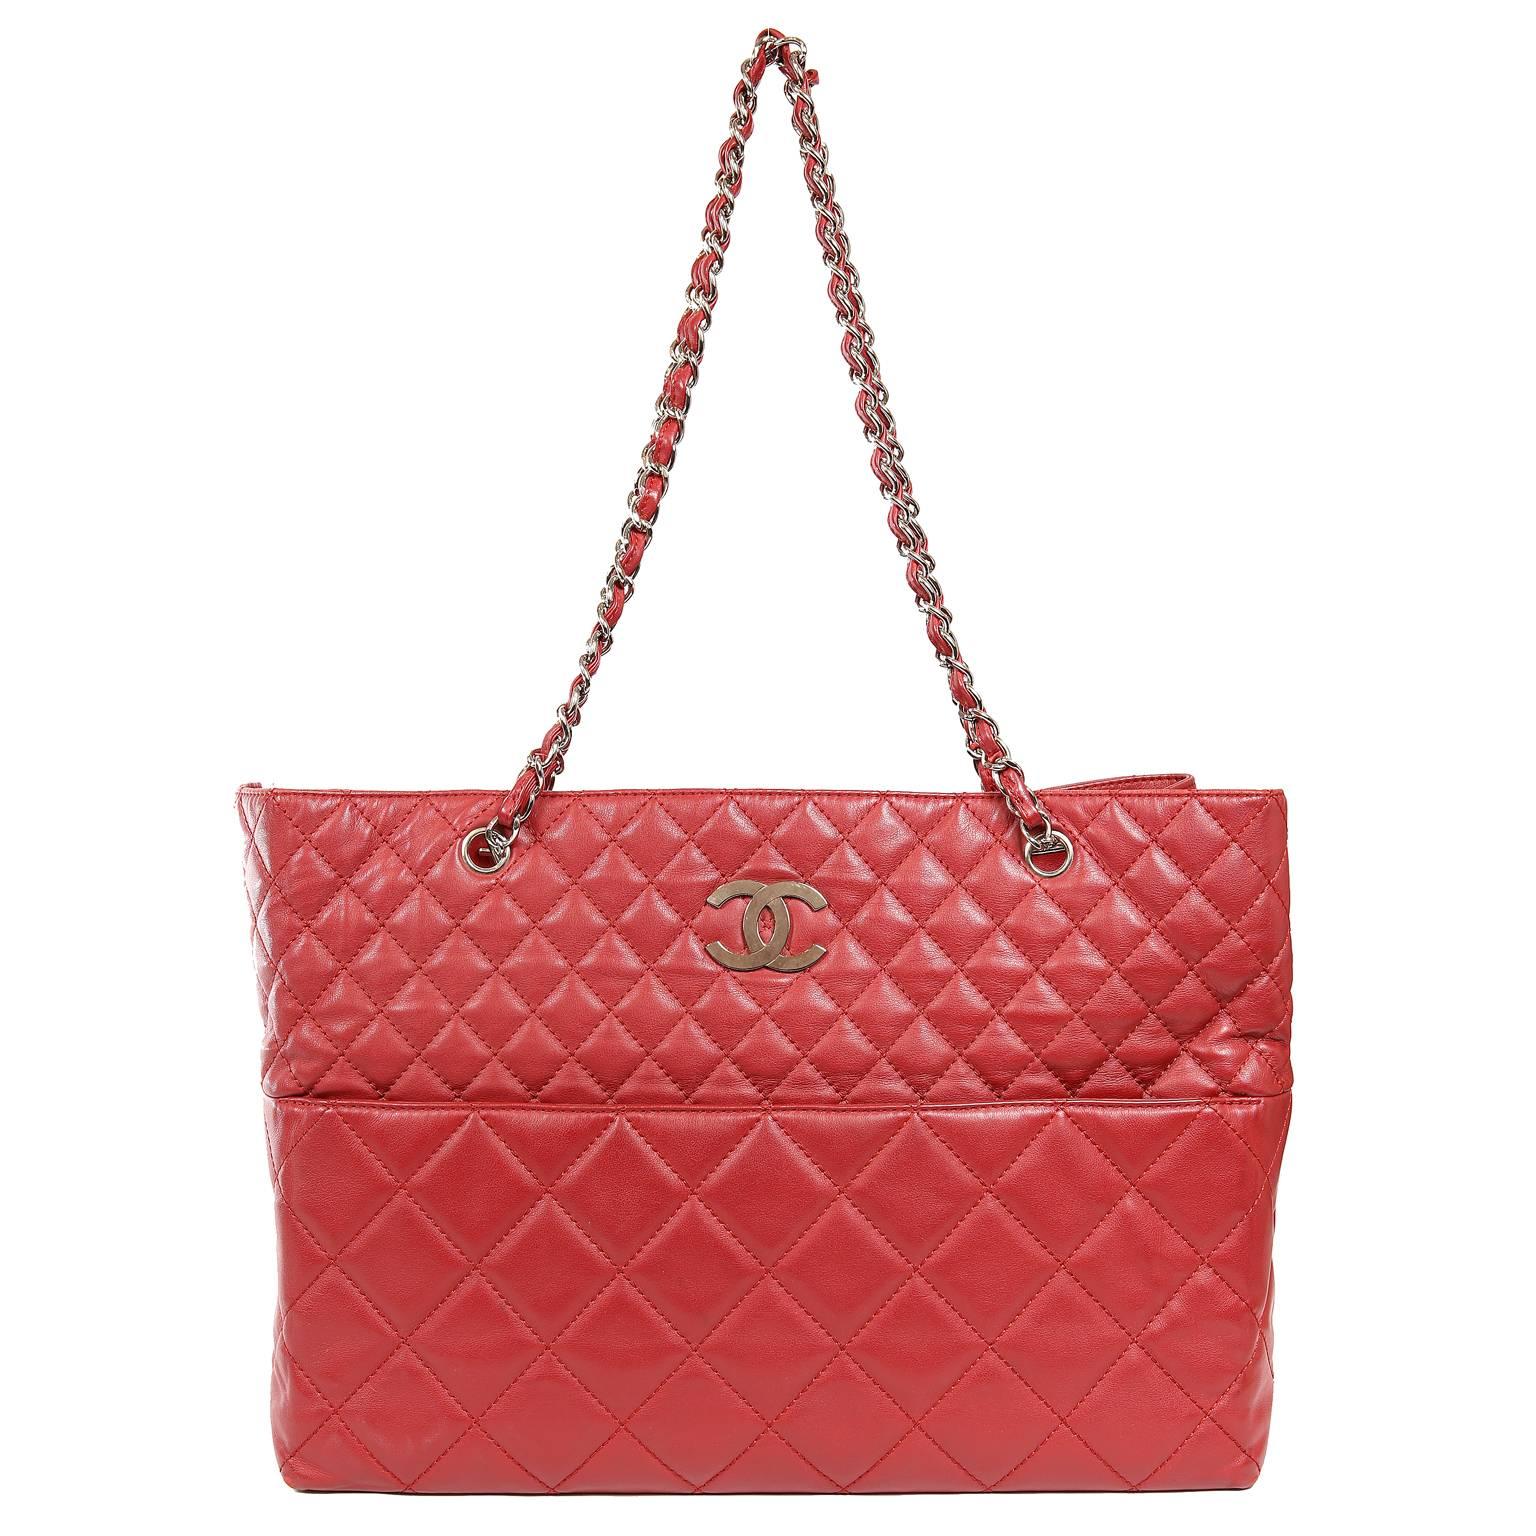 Chanel Red Leather XXL Tote Bag 6